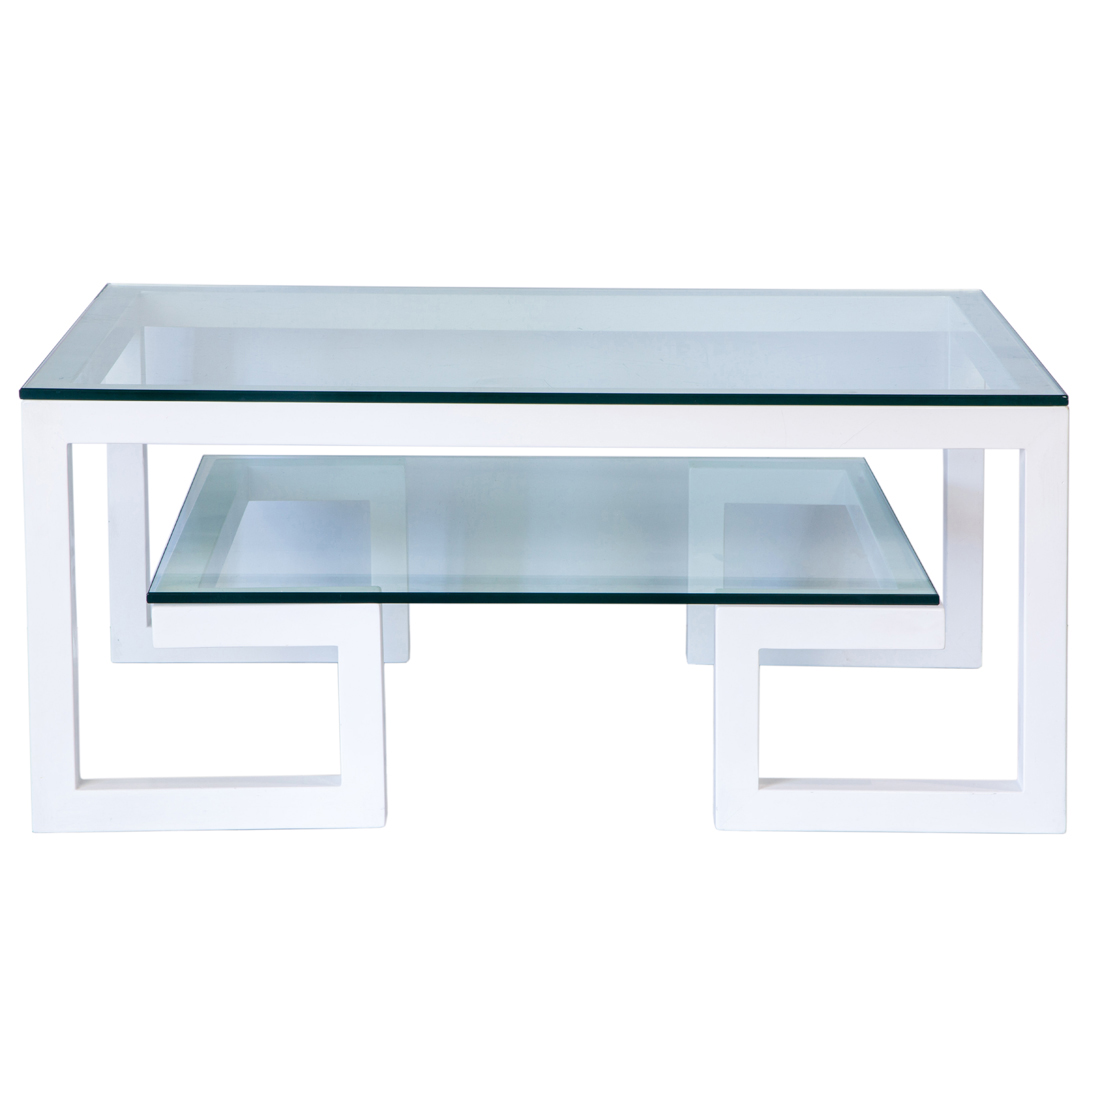 A CONTEMPORARY GLASS TOP COCKTAIL TABLE